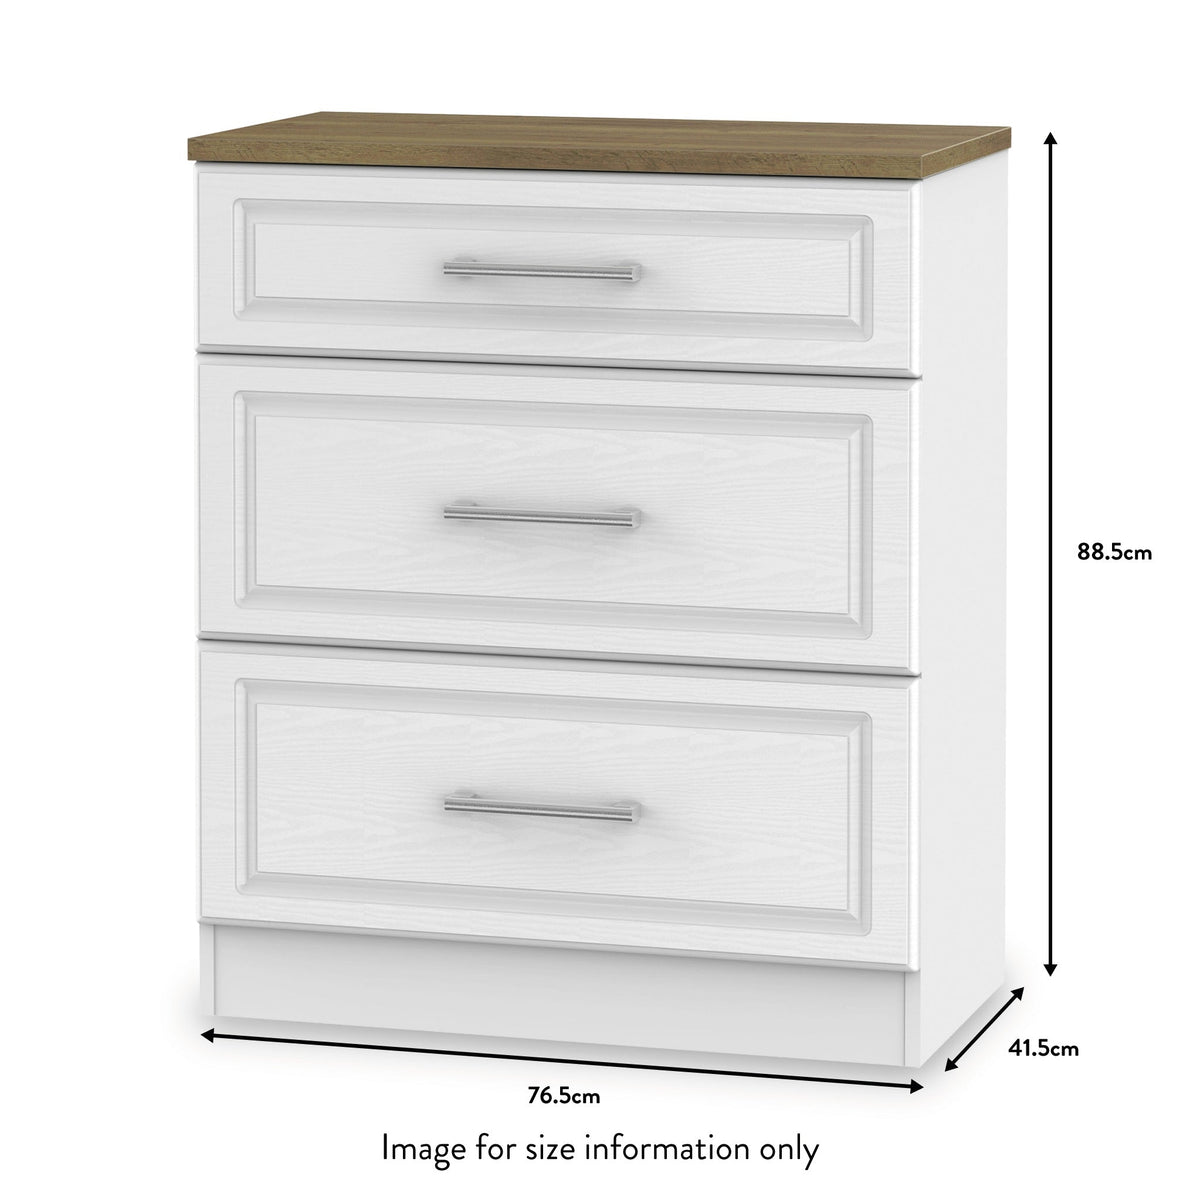 Talland White 3 Drawer Deep Chest from Roseland size